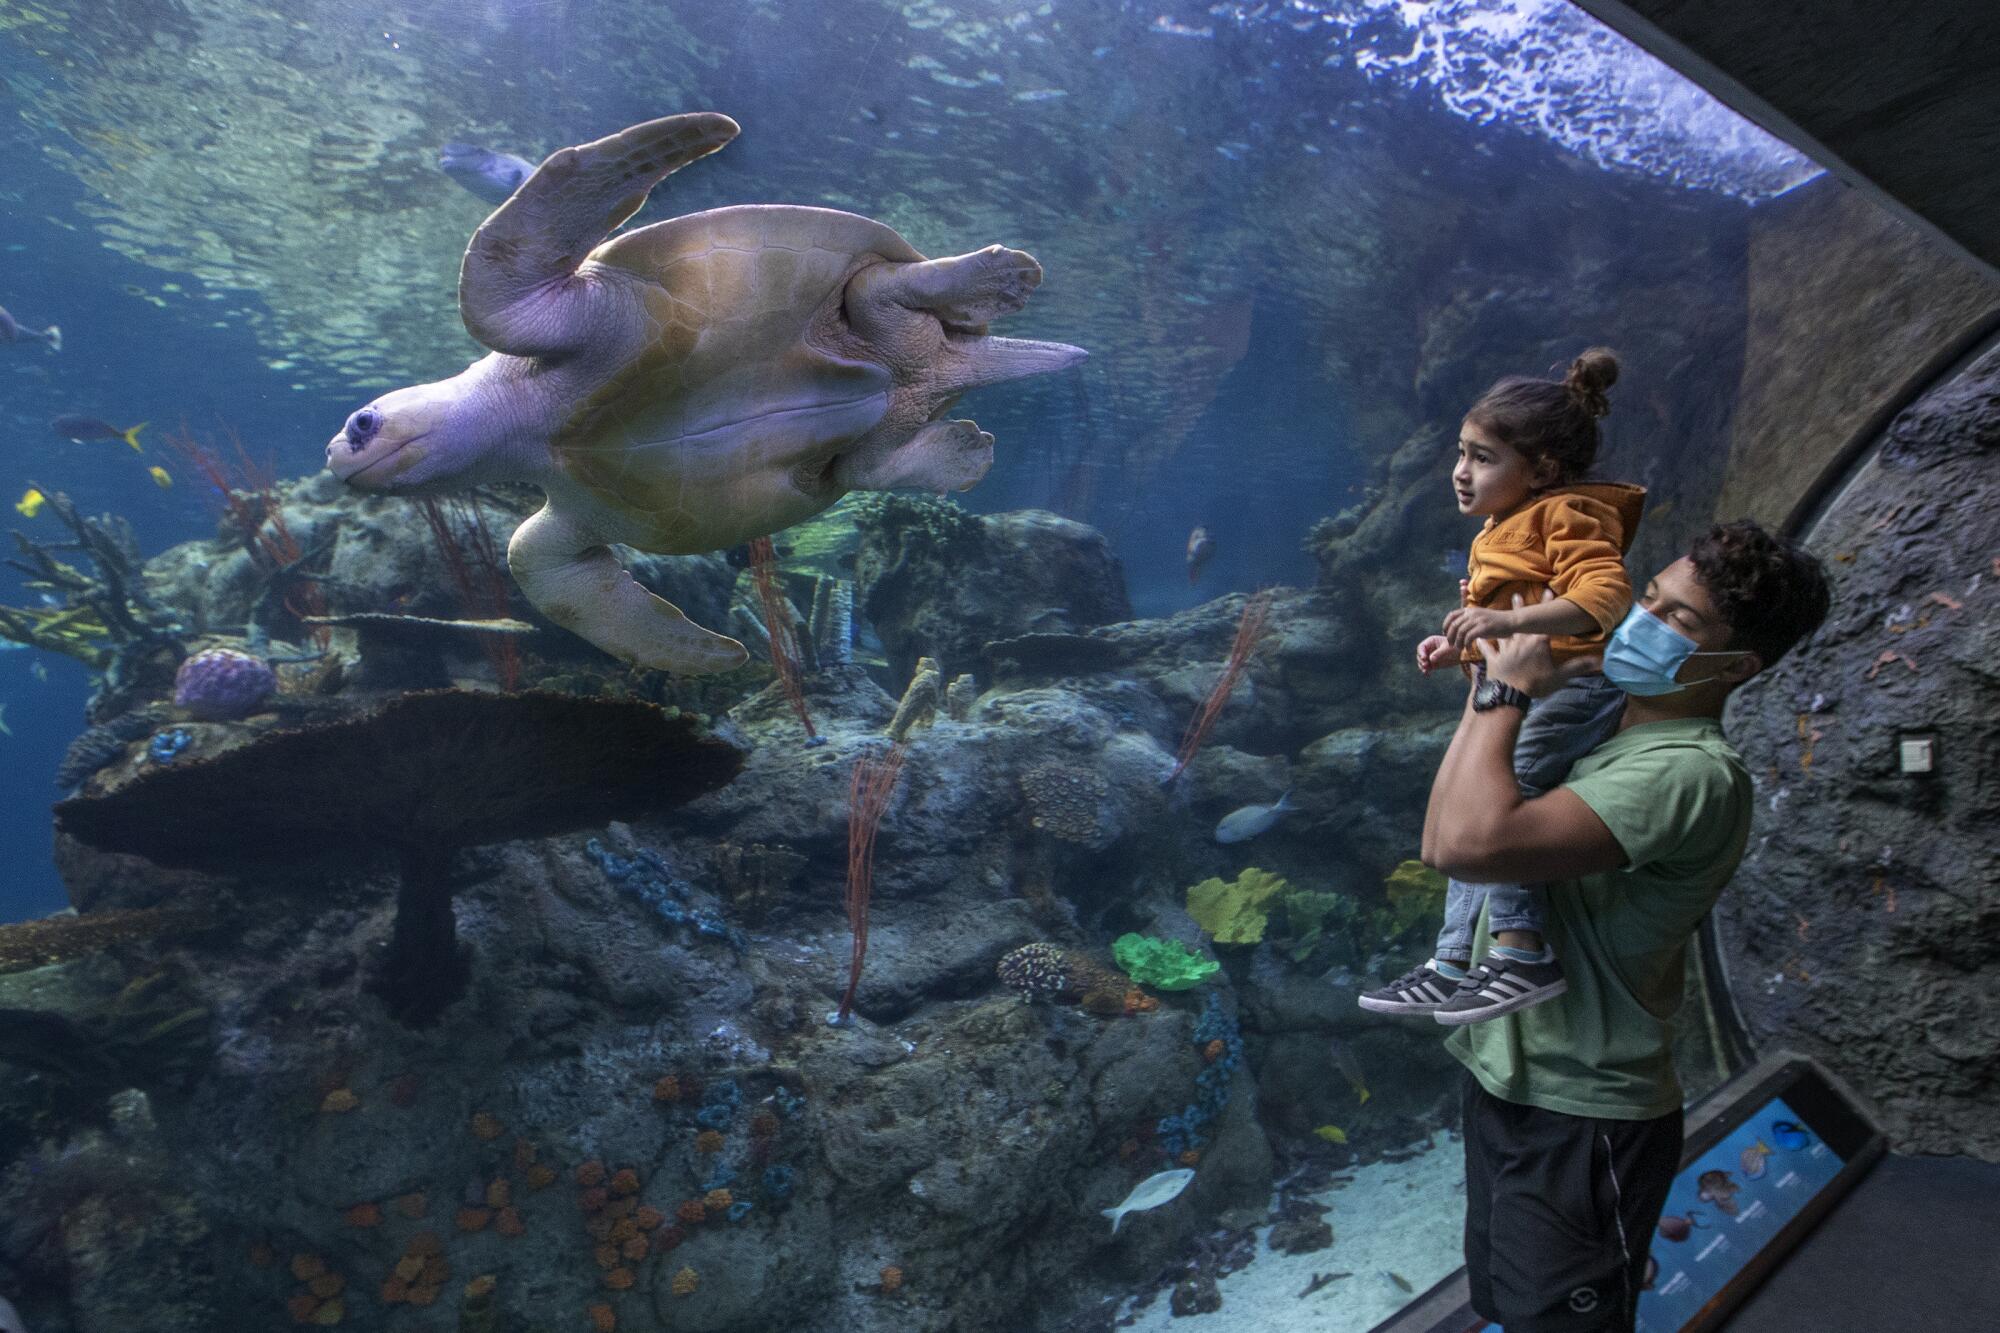 A teenage boy holds up a young child as they watch a turtle swim past them in an exhibit